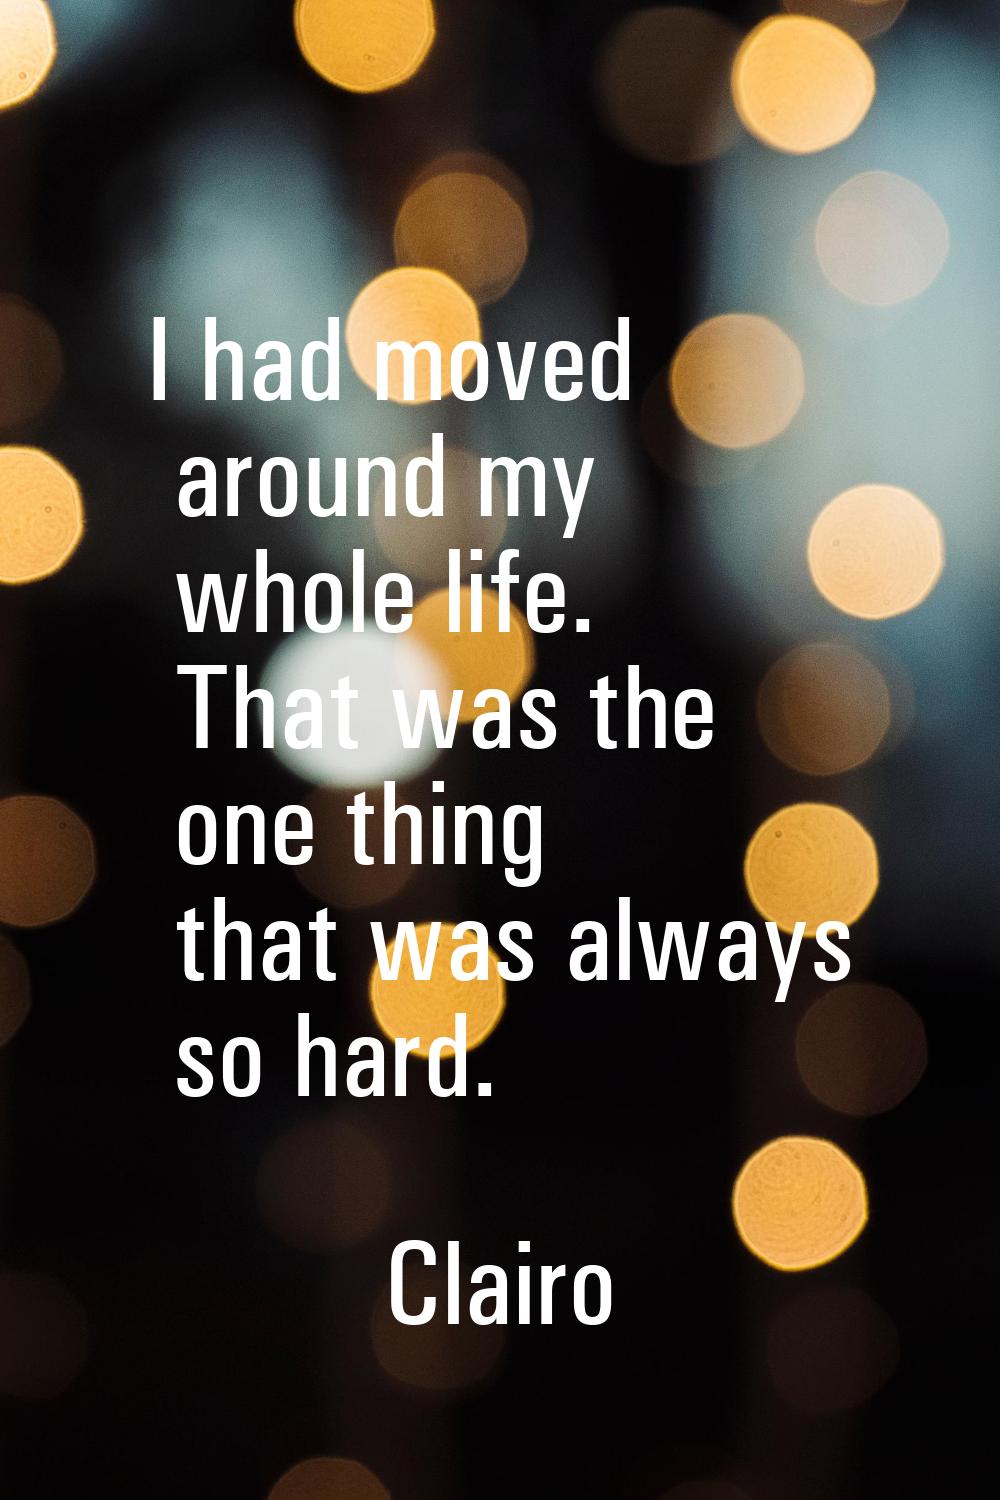 I had moved around my whole life. That was the one thing that was always so hard.